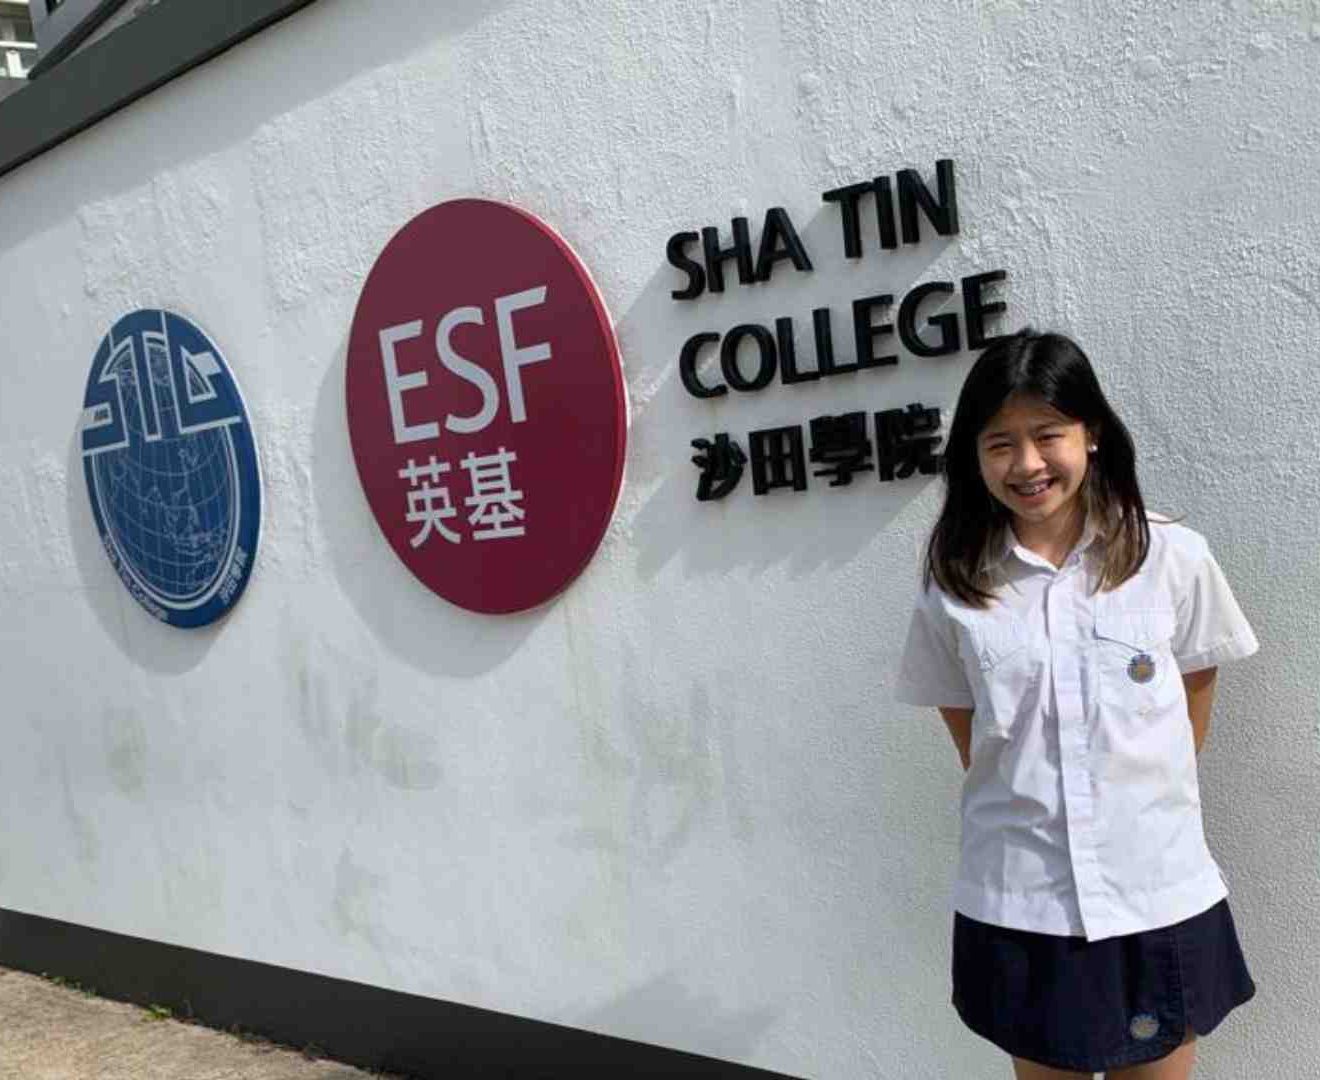 pivot academics international school tutoring intensive course background image former student audrey so shatin college hong kong sat ial gceal alevel act